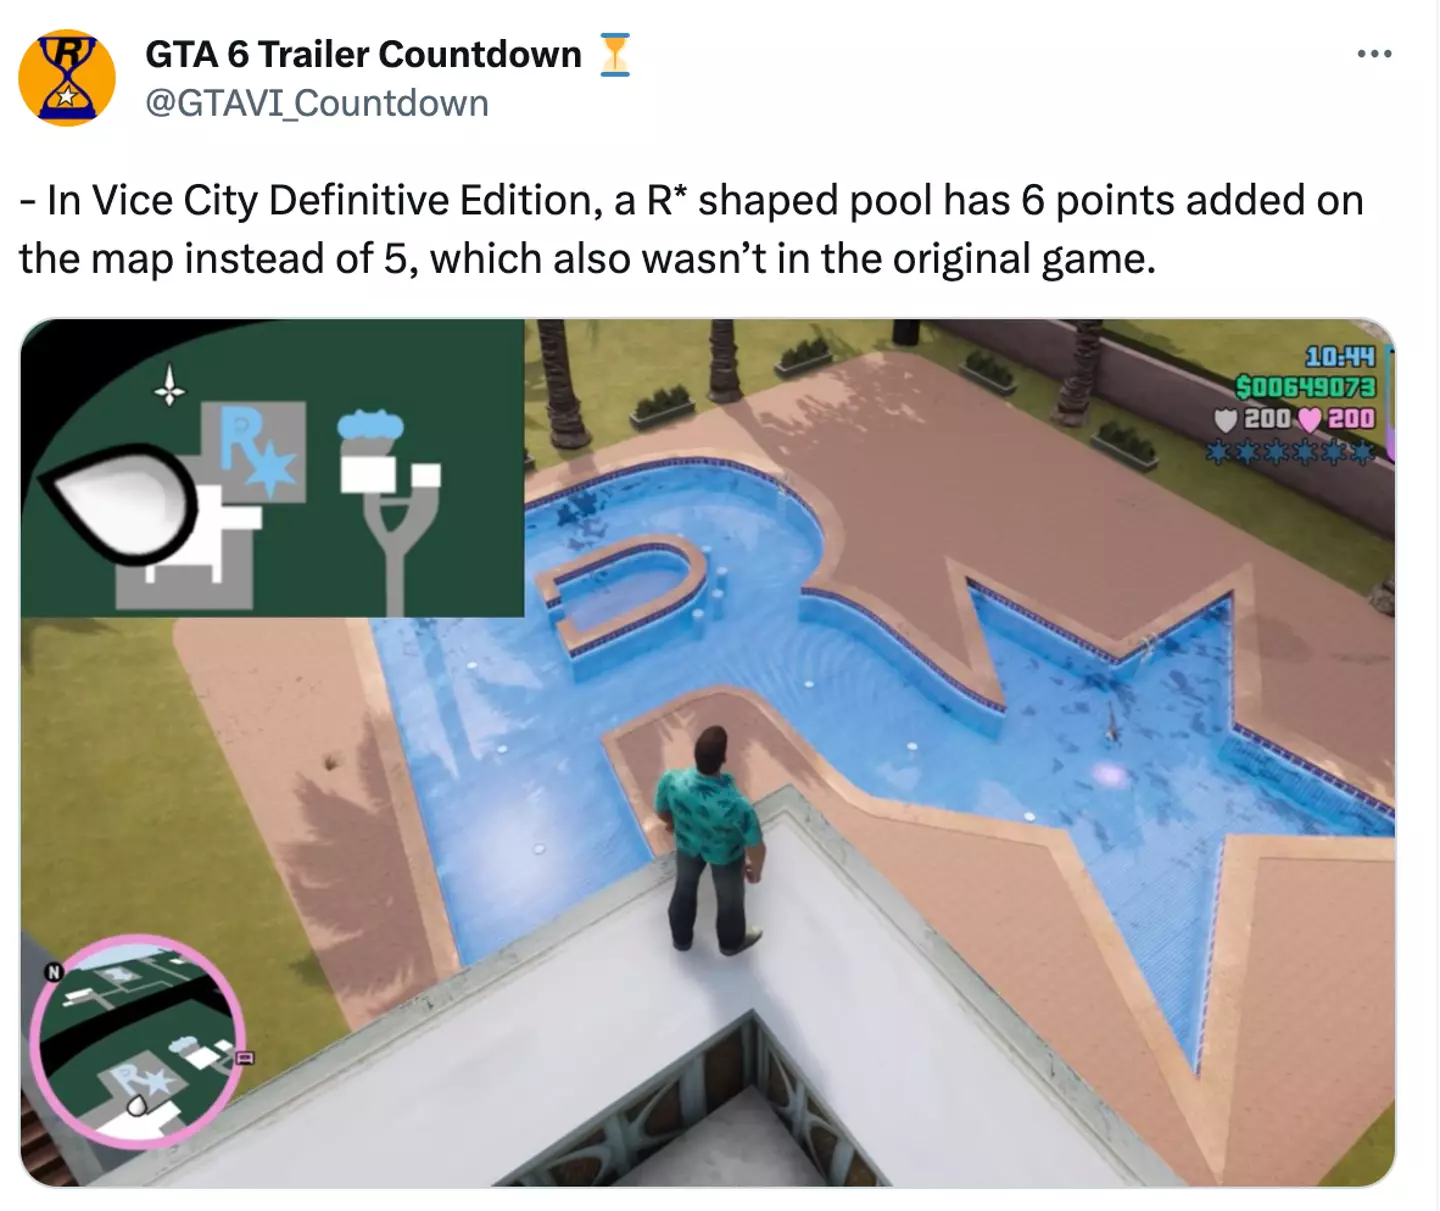 The X user also believed a 'R*' shaped pool had been updated in GTA: Vice City.